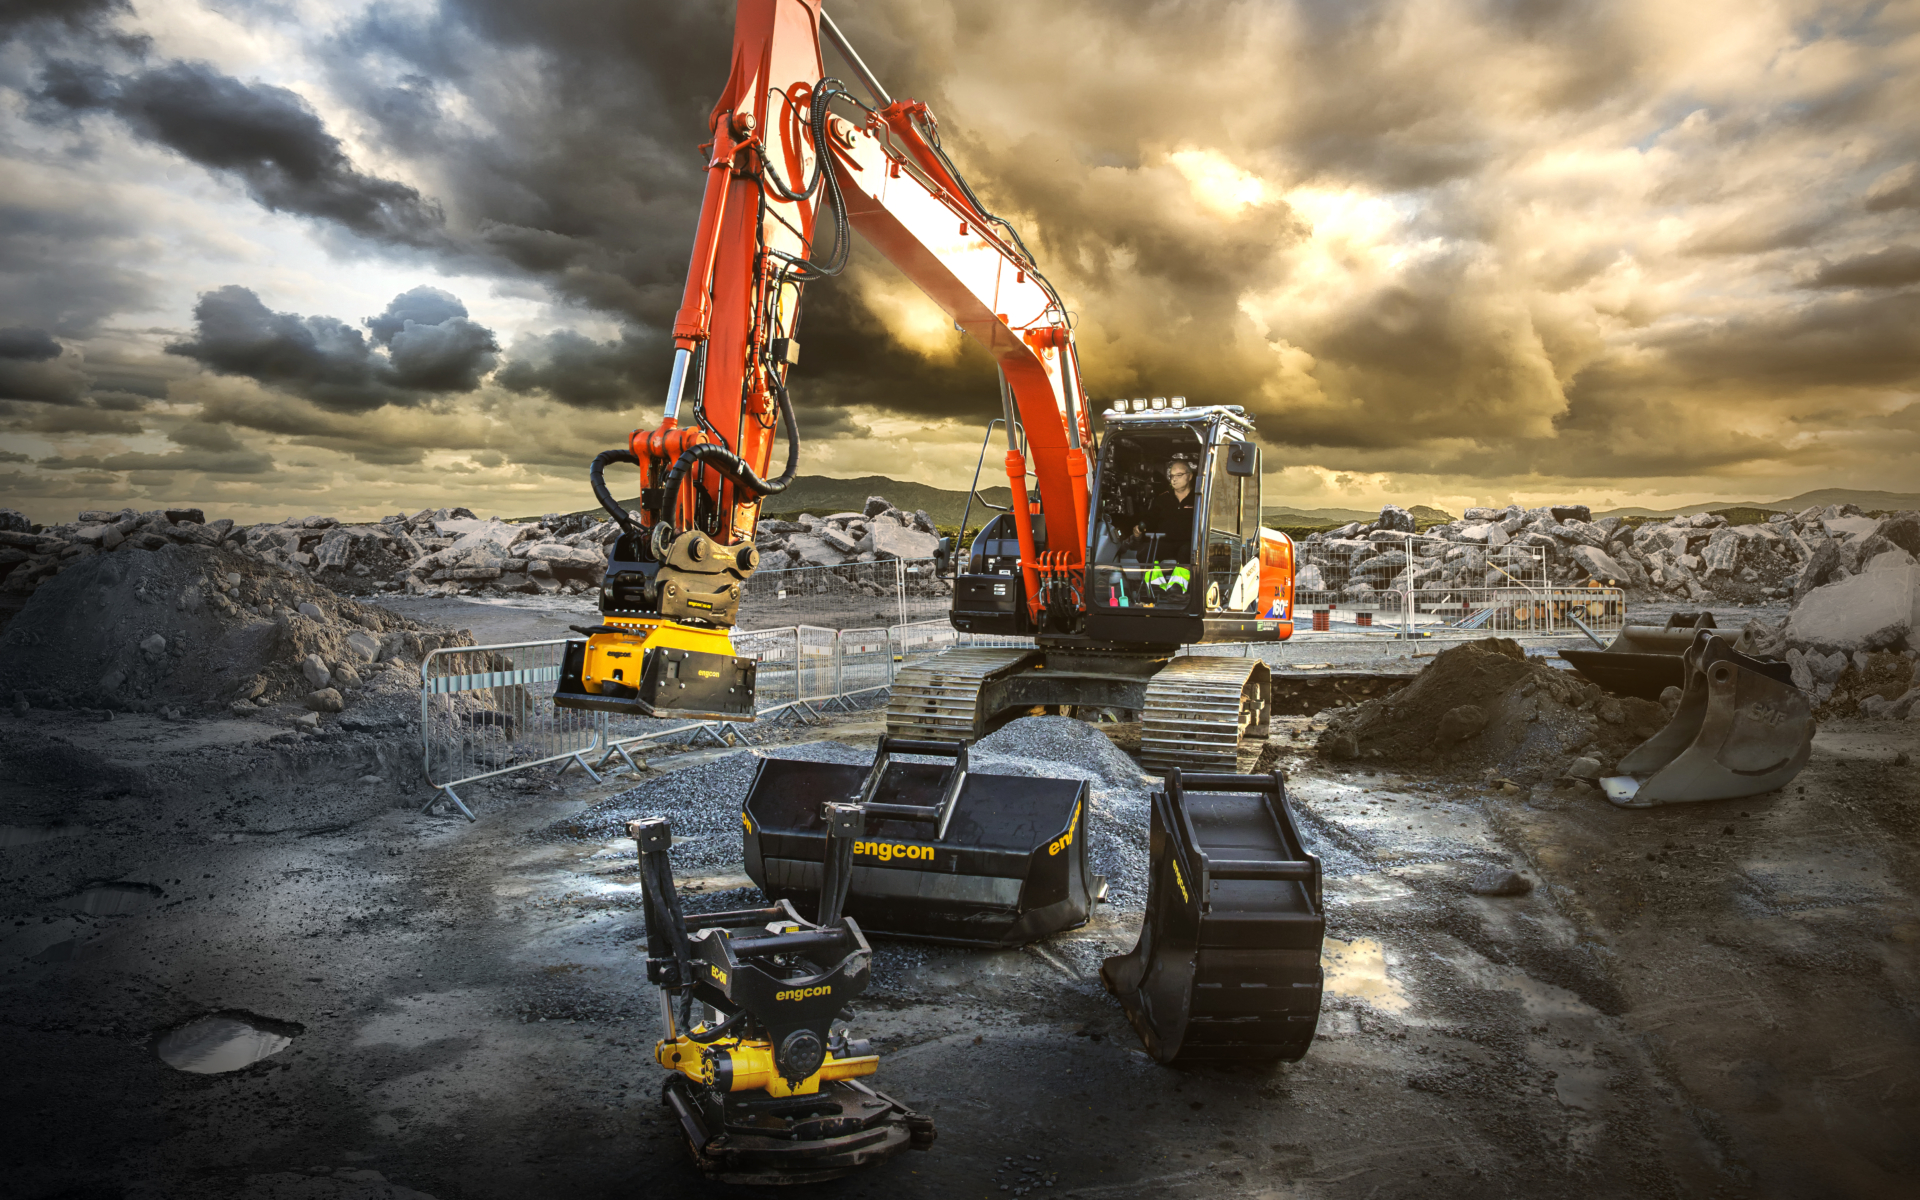 engcon strengthens its presence in Norway with local sales company